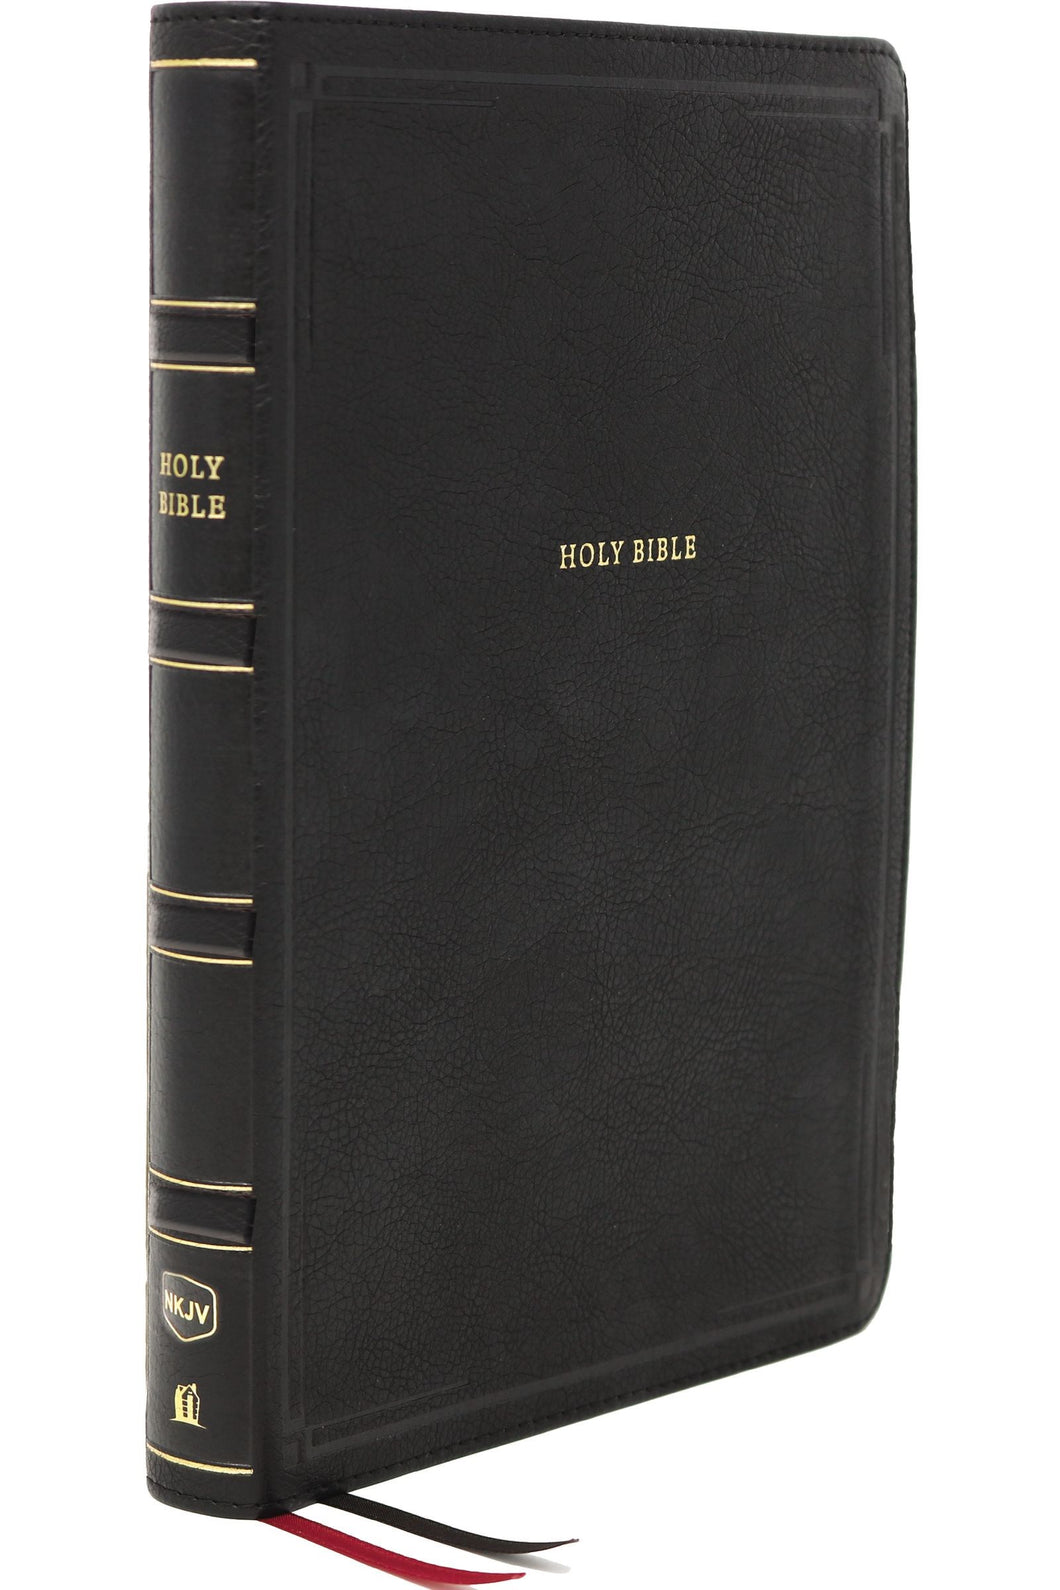 NKJV Deluxe Thinline Reference Bible (Comfort Print)-Black Leathersoft